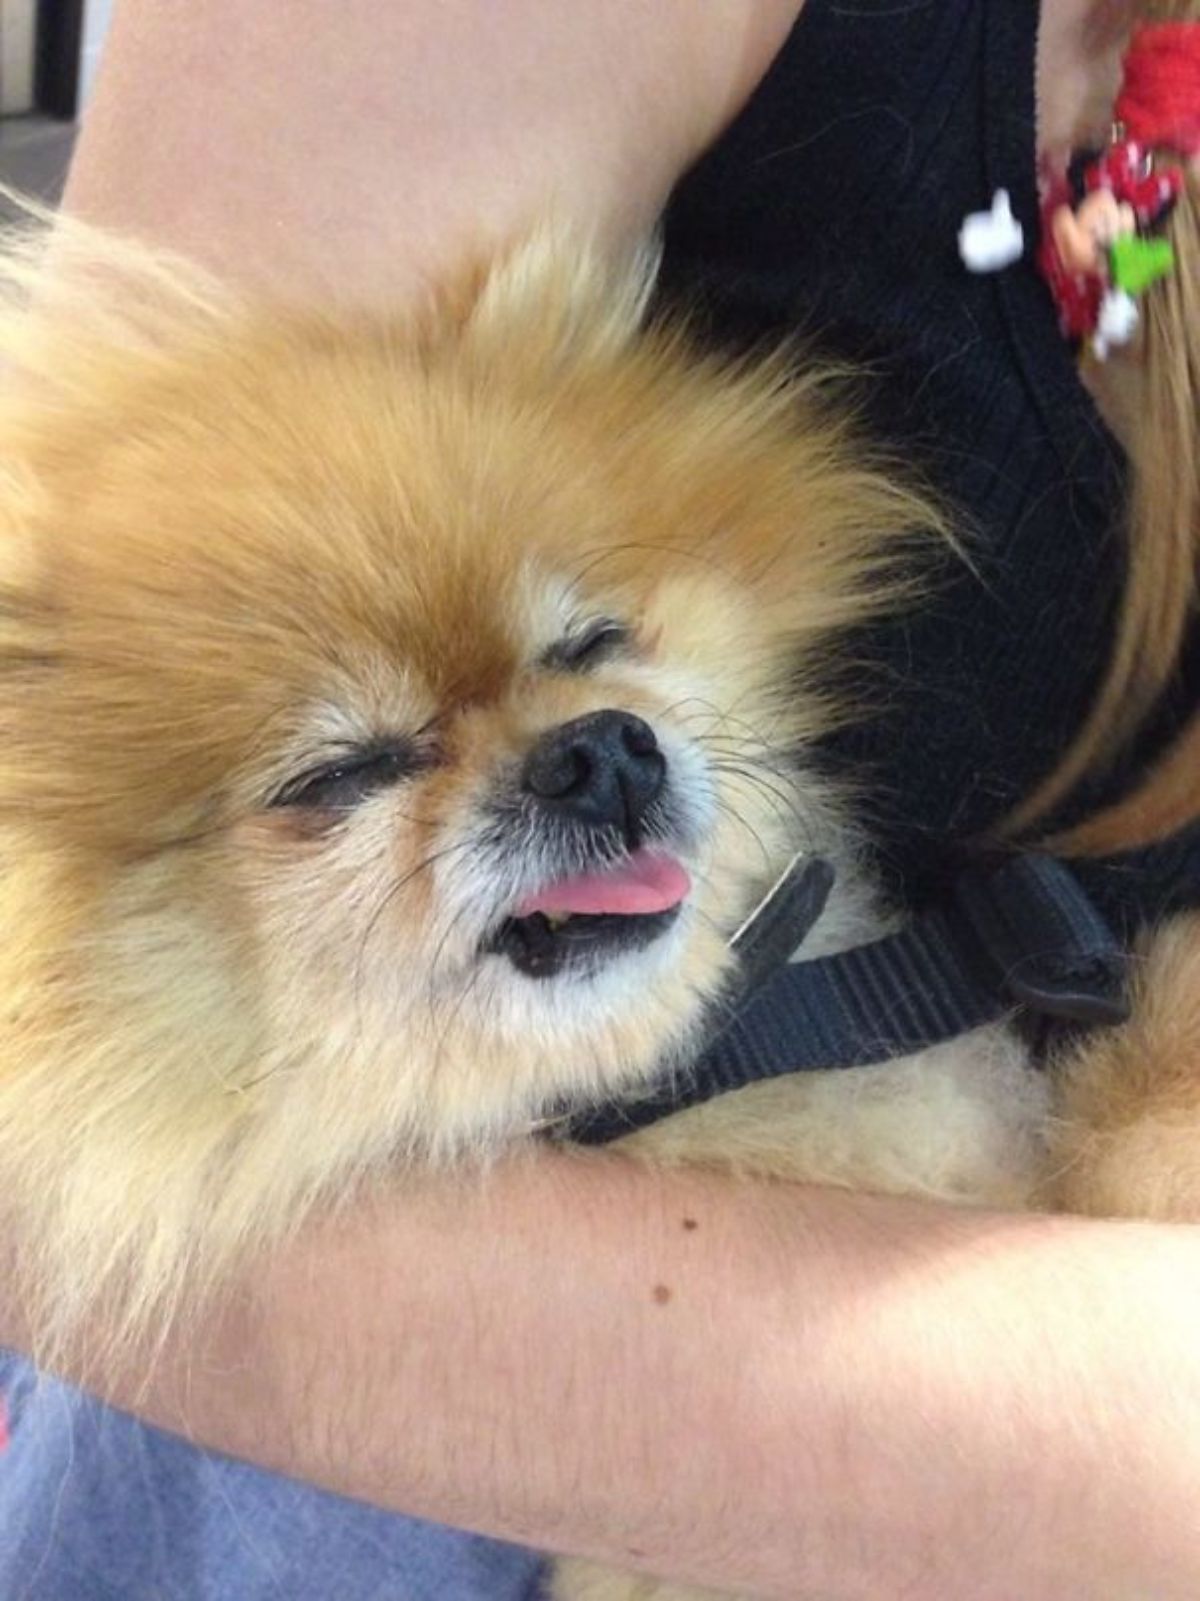 brown and white fluffy pomeranian with narrowed eyes and the tongue sticking out being held by someone